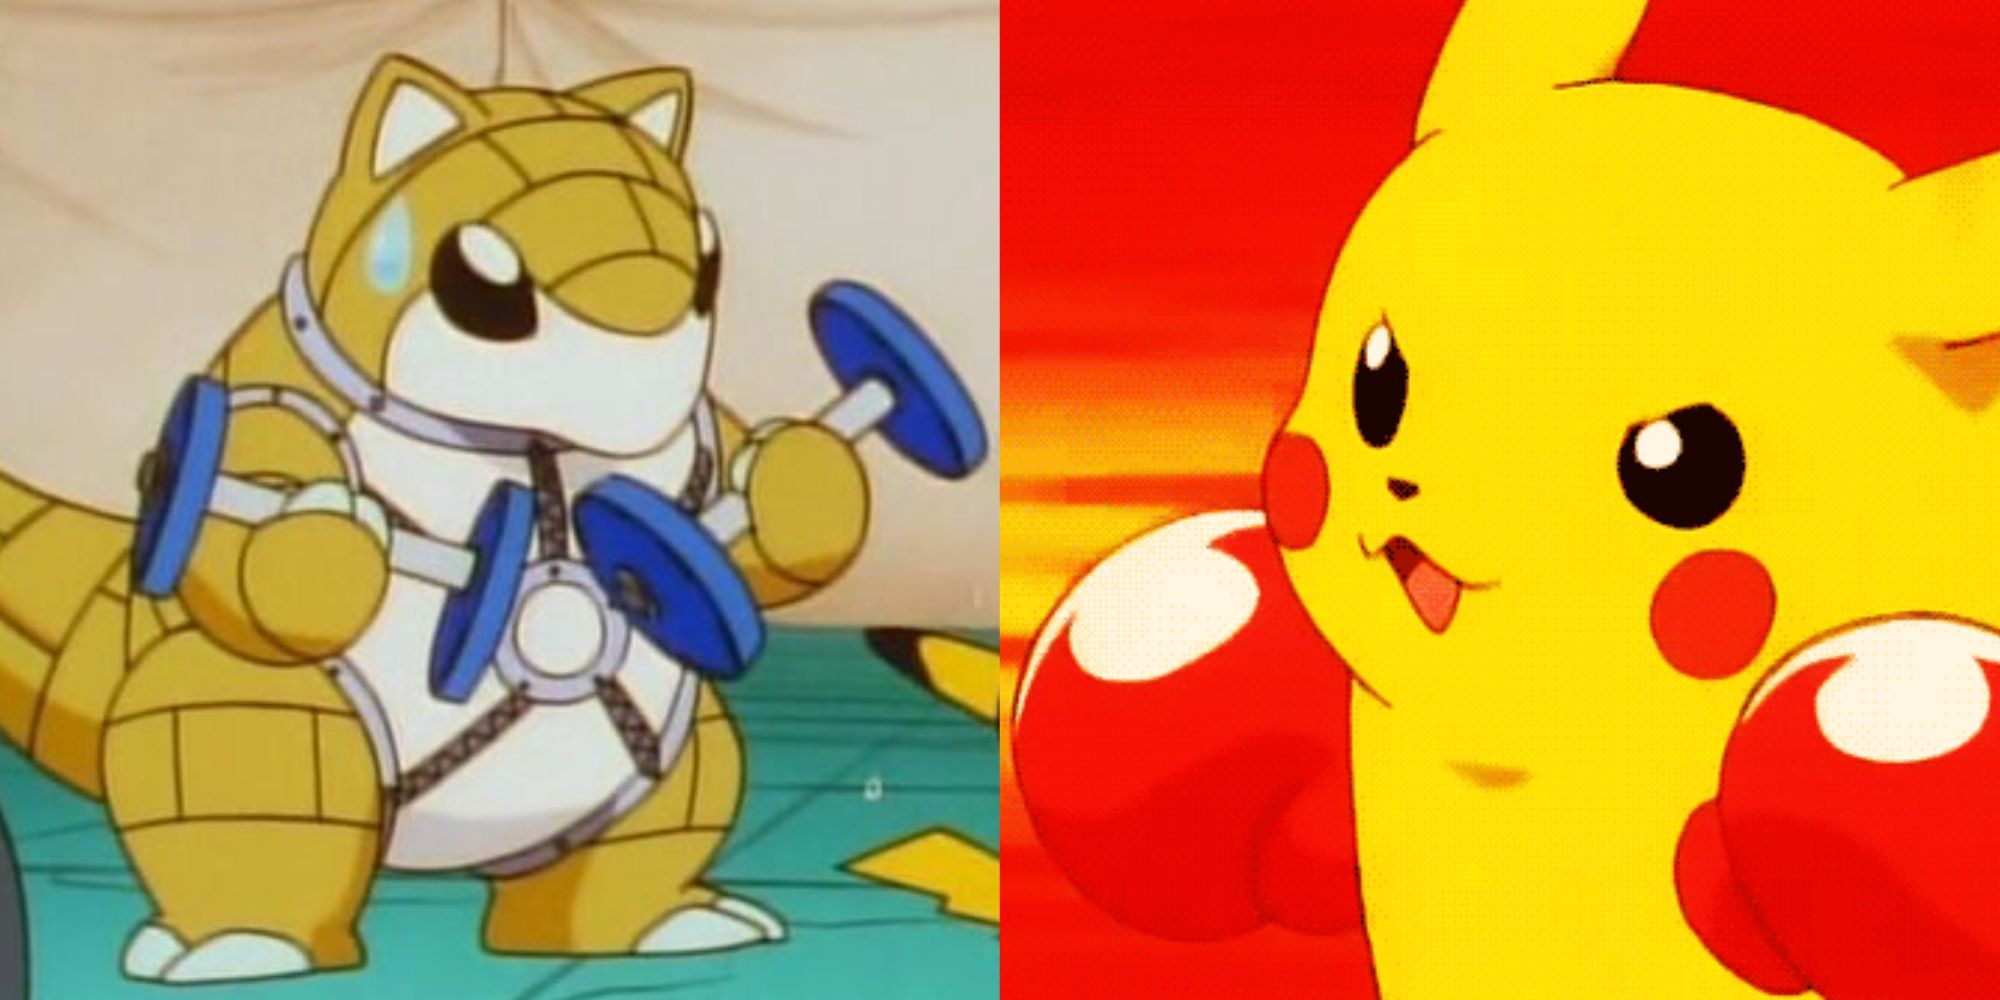 Pokemon sands weightlifting and boxing pikachu